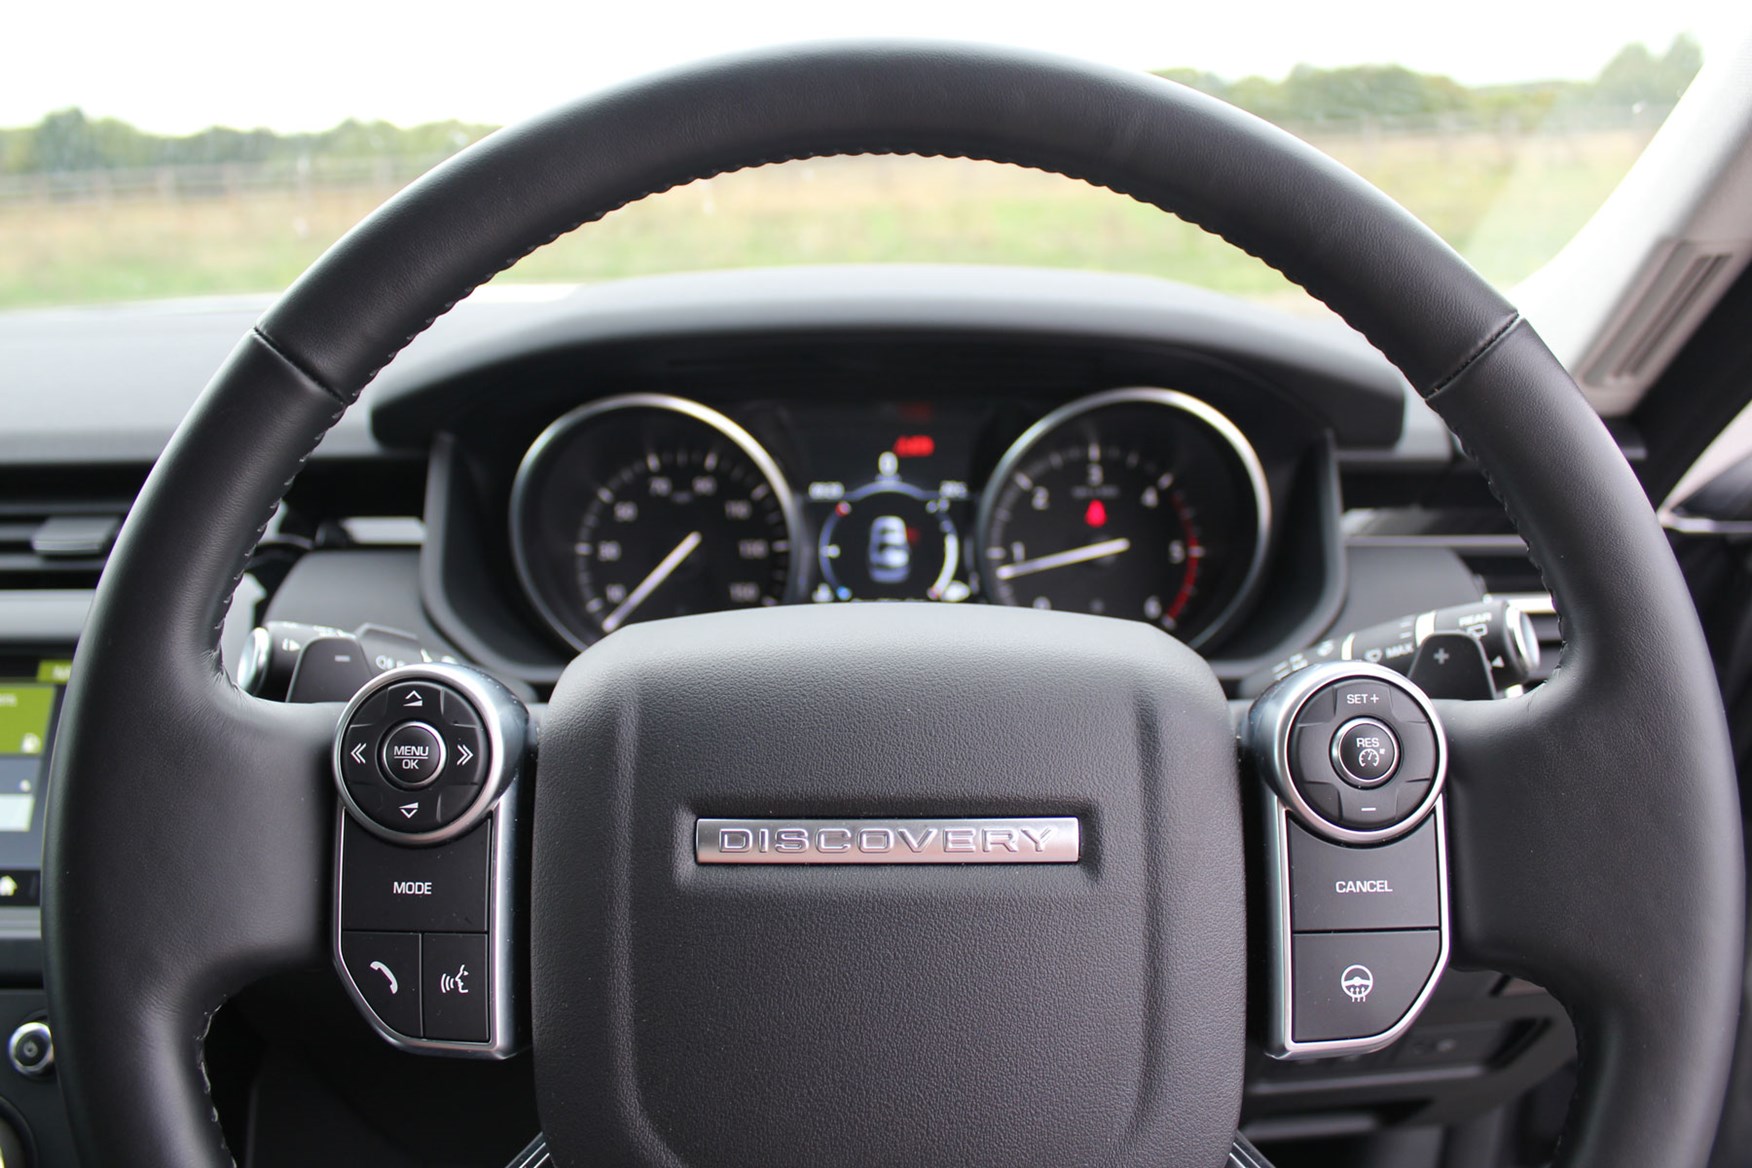 Land Rover Disovery steering wheel